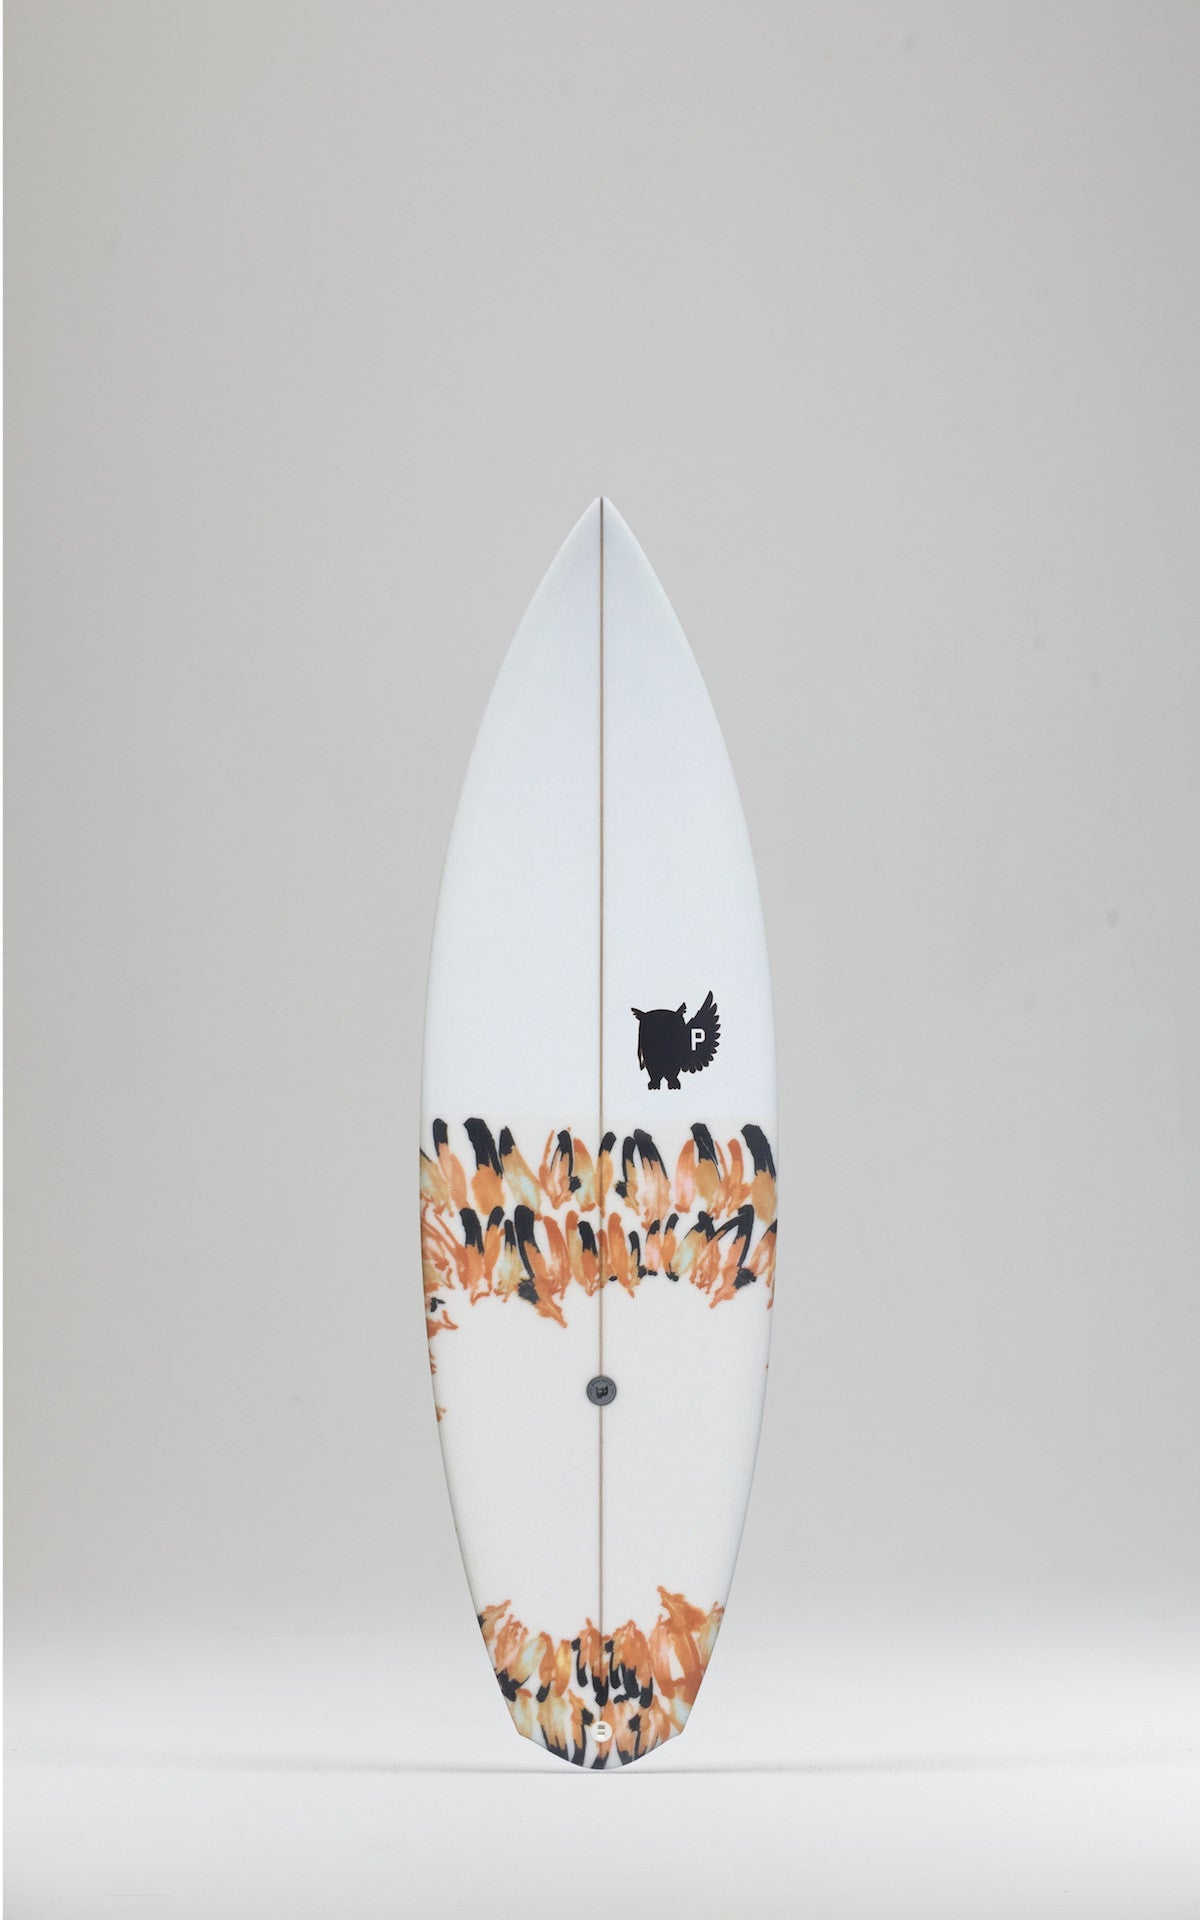 PIETY Surfboards - Compactor